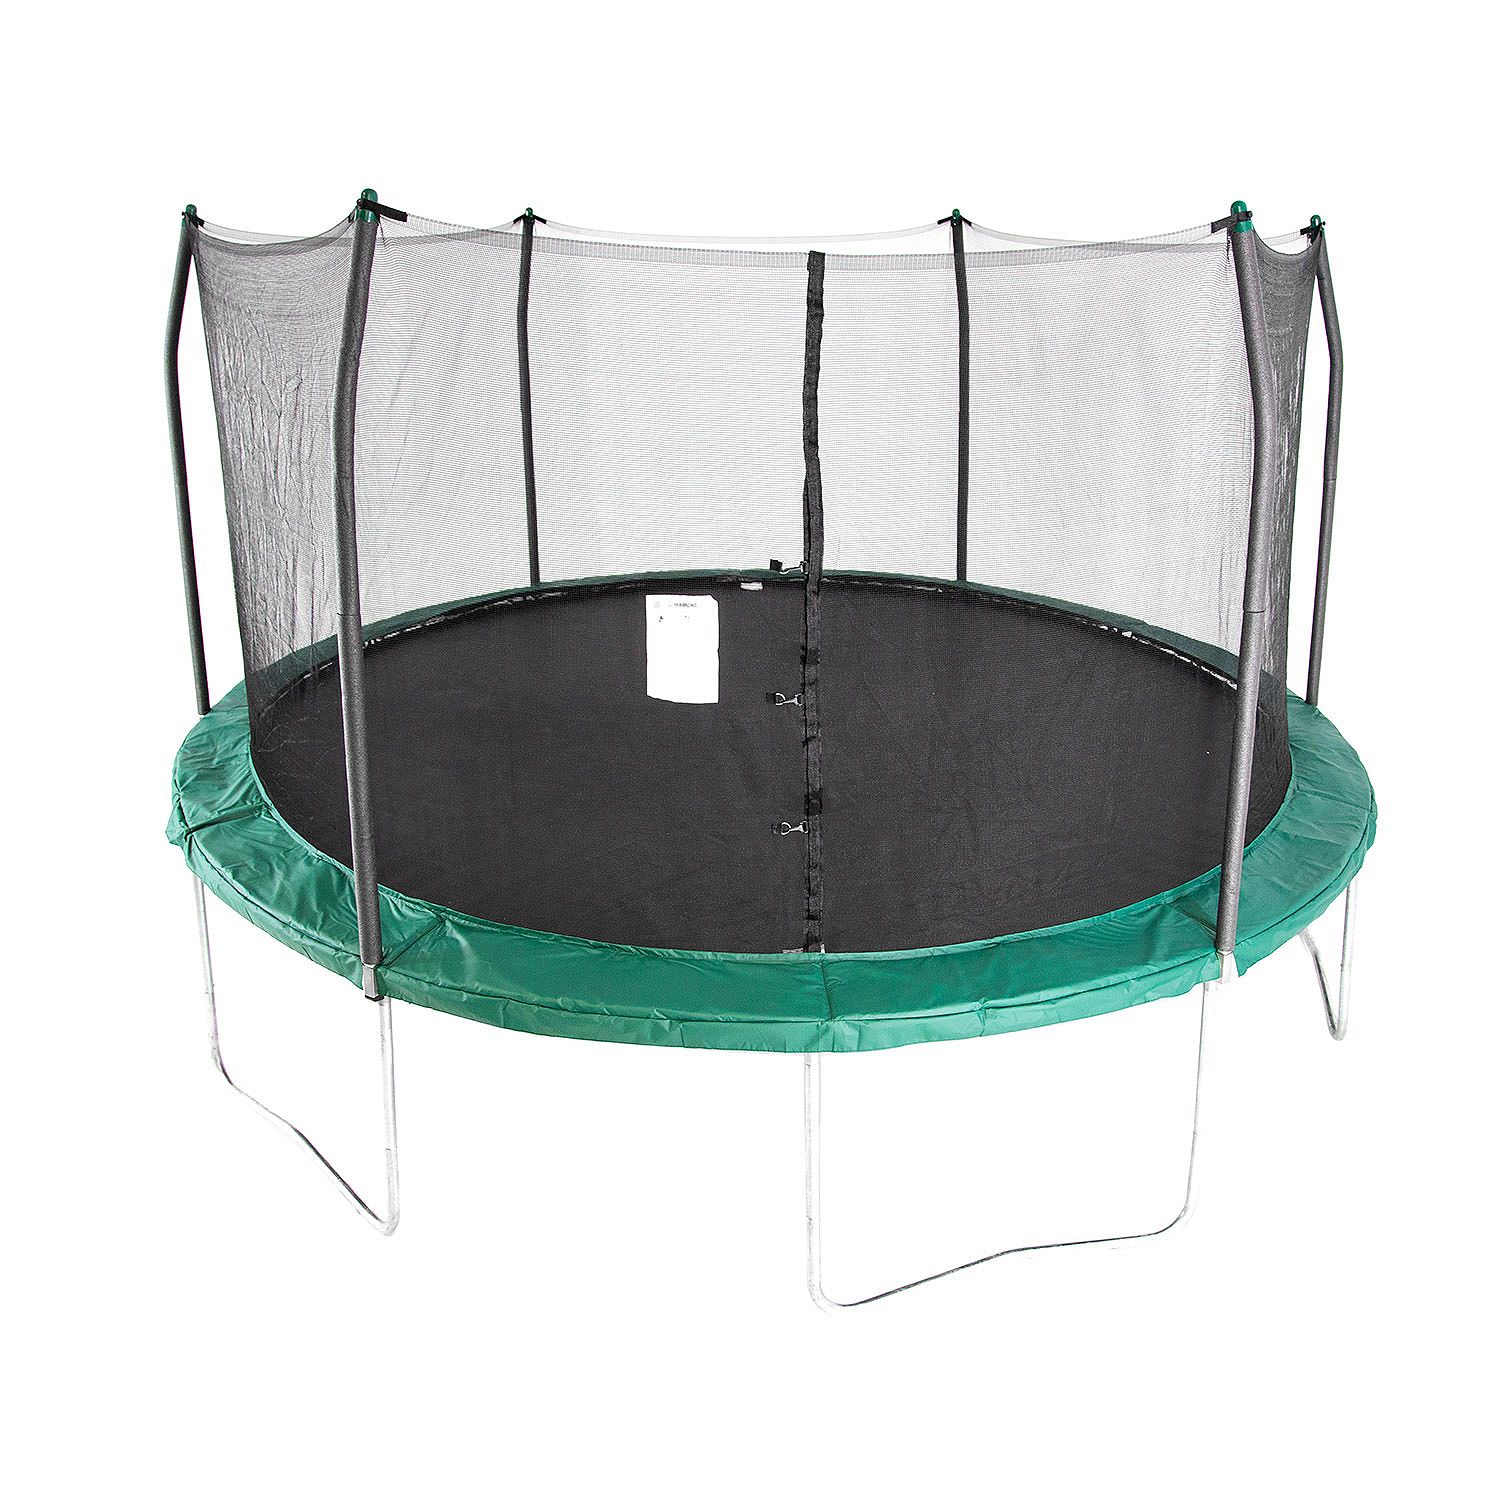 Skywalker Trampolines 15′ Round Trampoline and Enclosure with 143 sq. ft. Jumping Surface